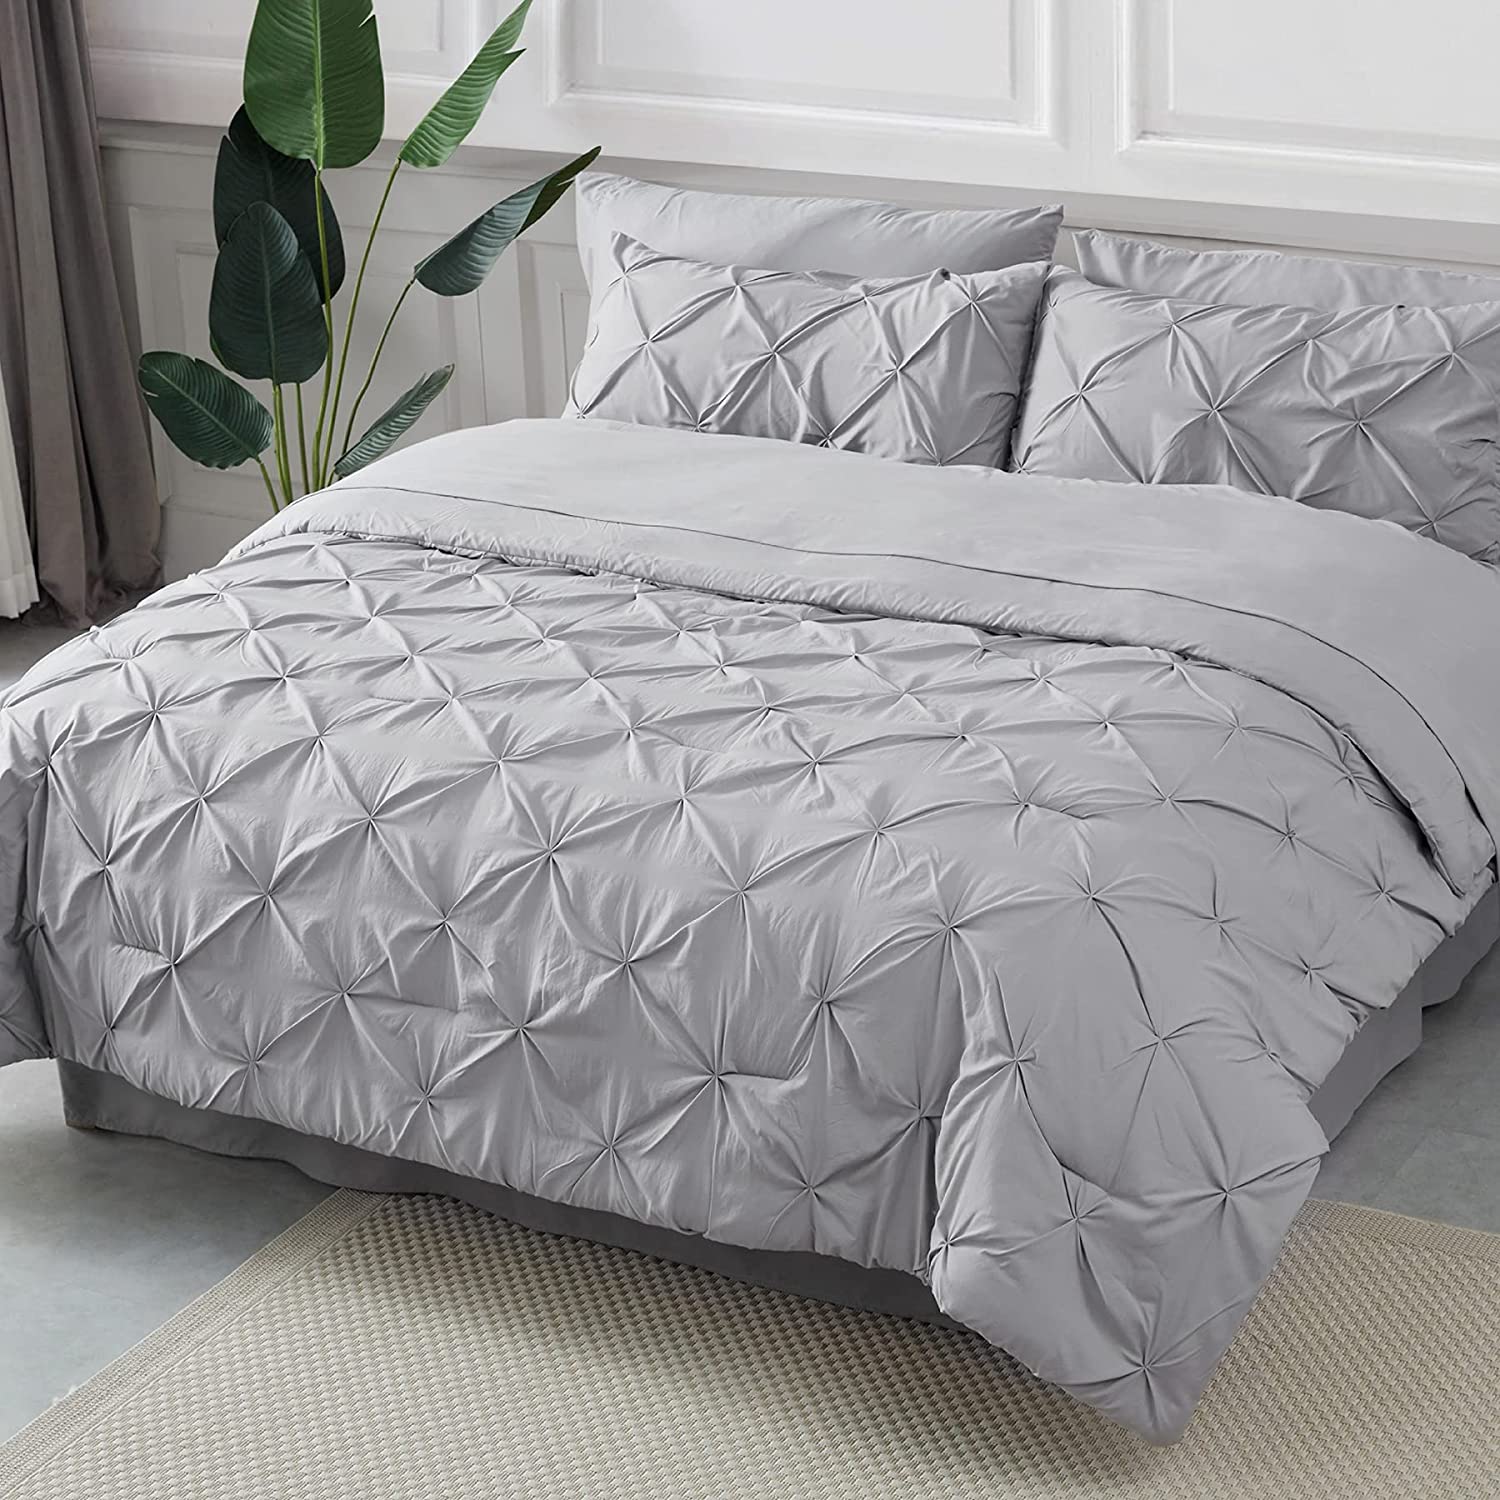 1 Pinch Pleat Comf Details about   Bedsure Comforter Set Queen/Full Bed in A Bag Grey 8 Pieces 